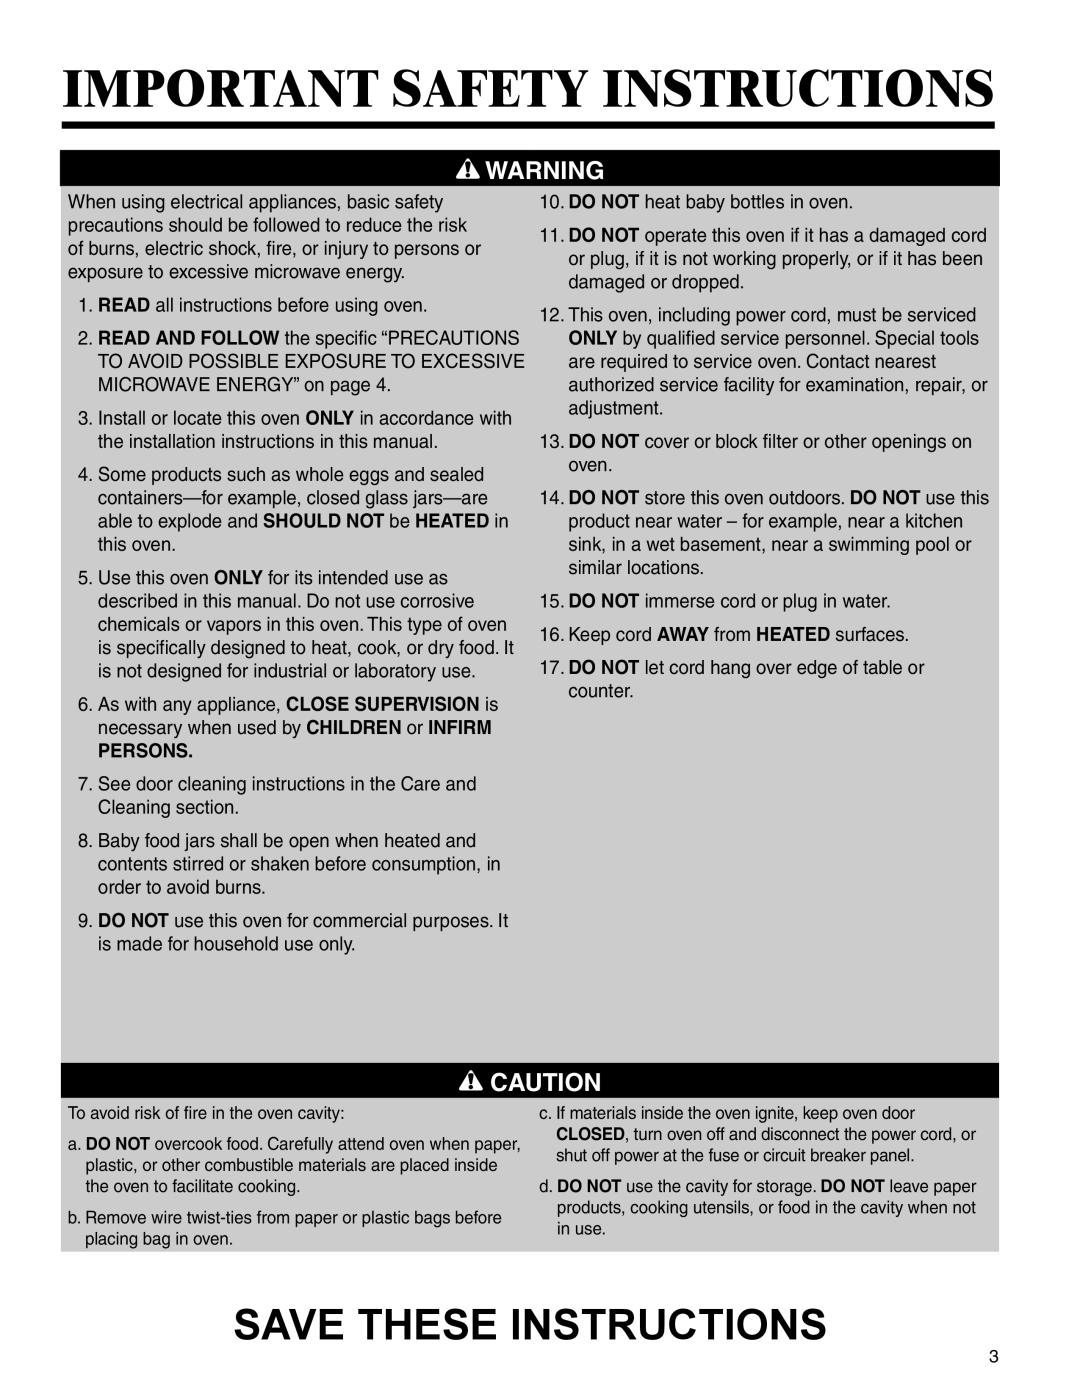 Maytag UMC5200BAB/W/S, UMC5200 BAB/W/S, UMC5200BCB/W/S Important Safety Instructions, Save These Instructions, Persons 